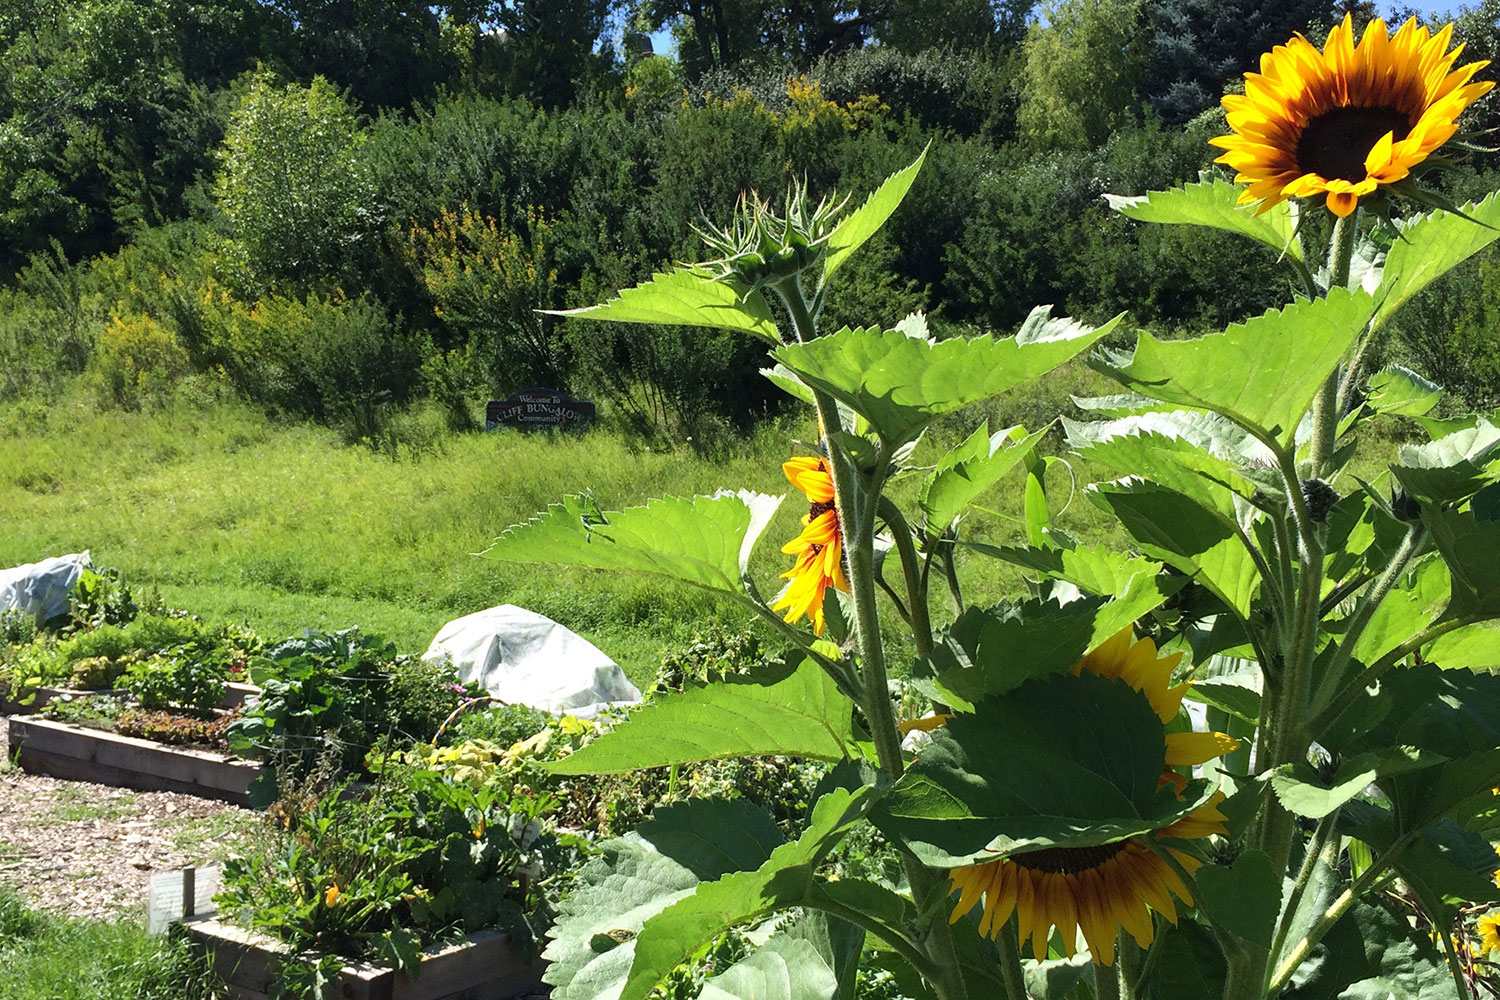 The Cliff Bungalow Community Garden is one of several similar installations sprinkled throughout the city, and interest in creating new community gardens continues to grow, according to the Calgary Horticultural Society.
Courtesy Lynn MacCallum